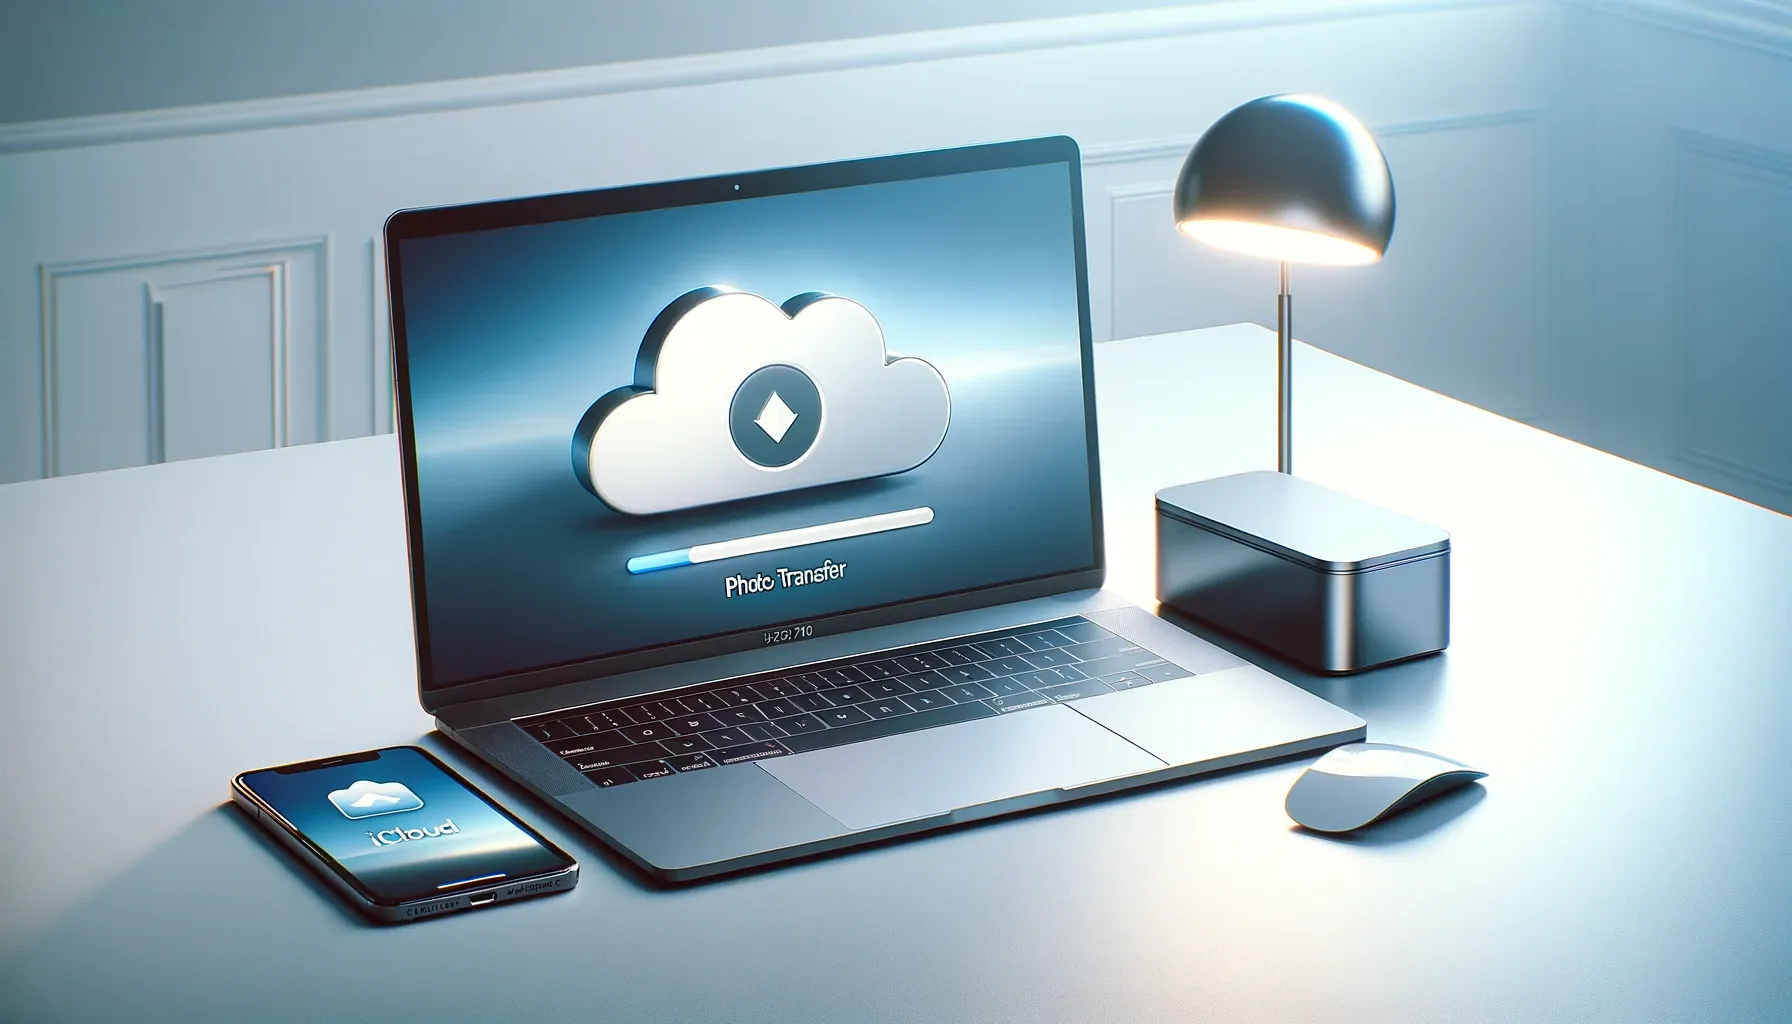 How to Move Photos from iCloud to External Hard Drive